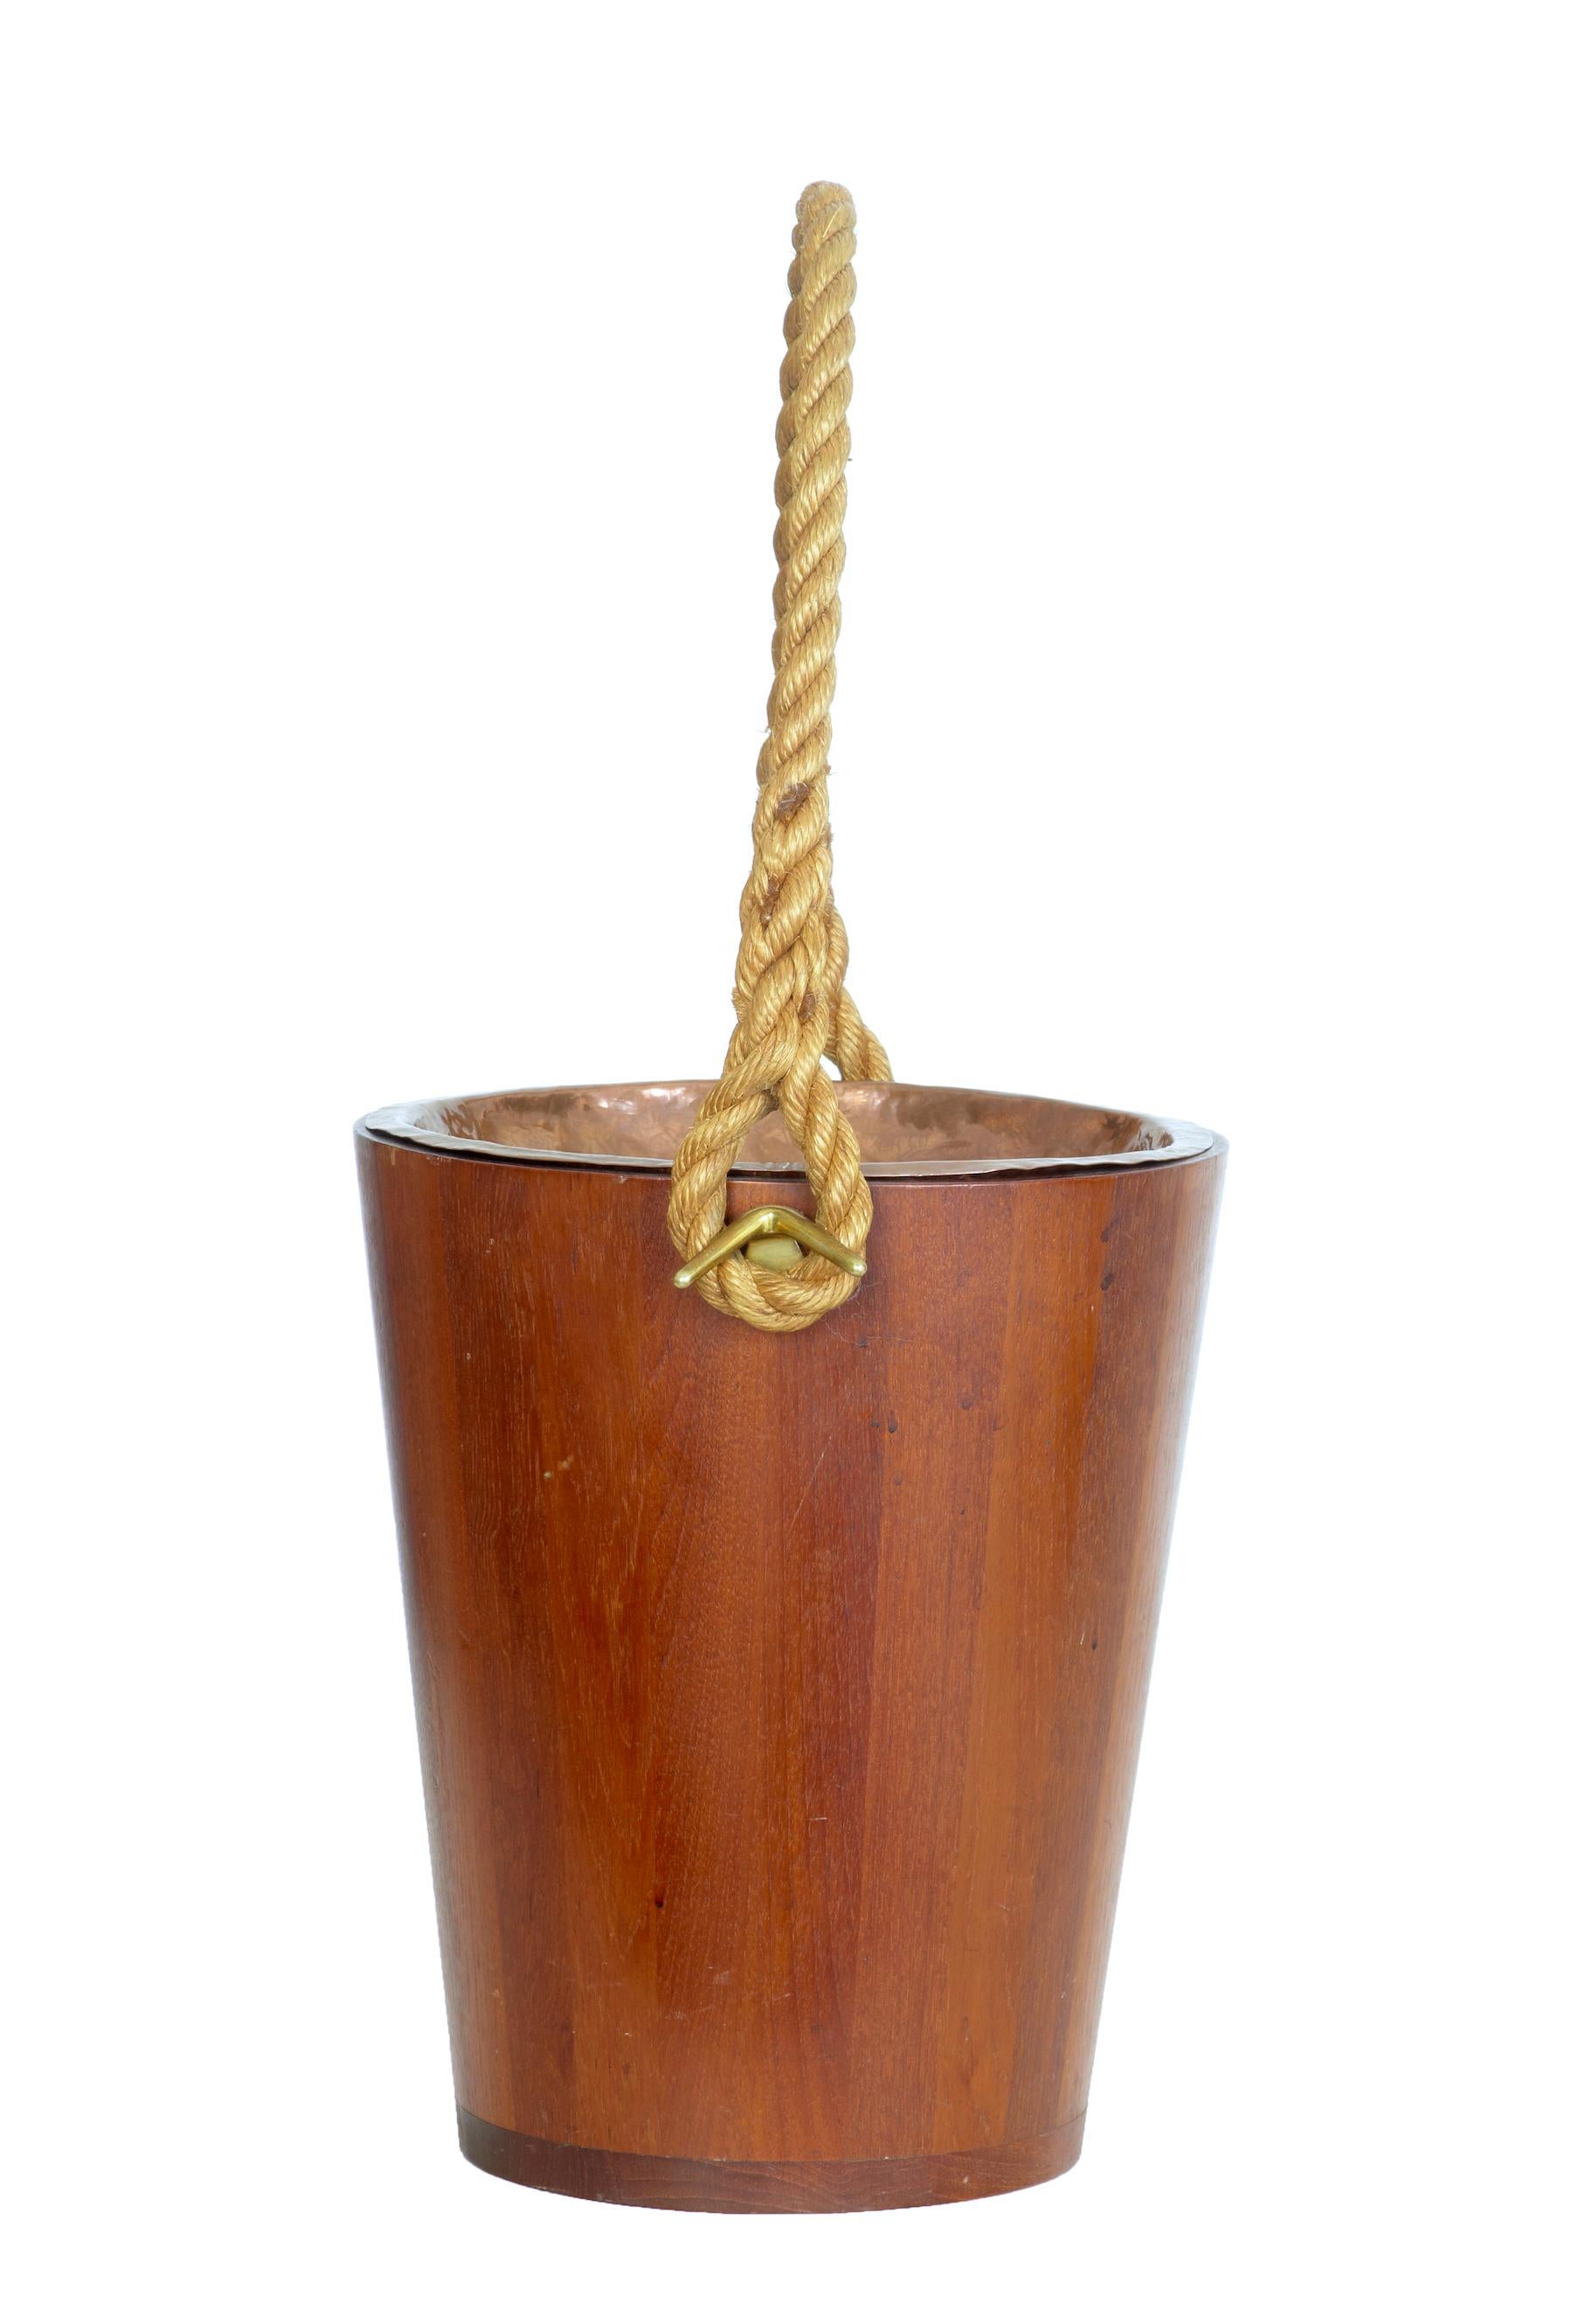 Decorative 20th century teak bucket with rope handle, circa 1950.

Ideal for use as a waste paper basket or a kindling bin beside the fire. Teak bucket with removable copper dish.

Minor surface marks.